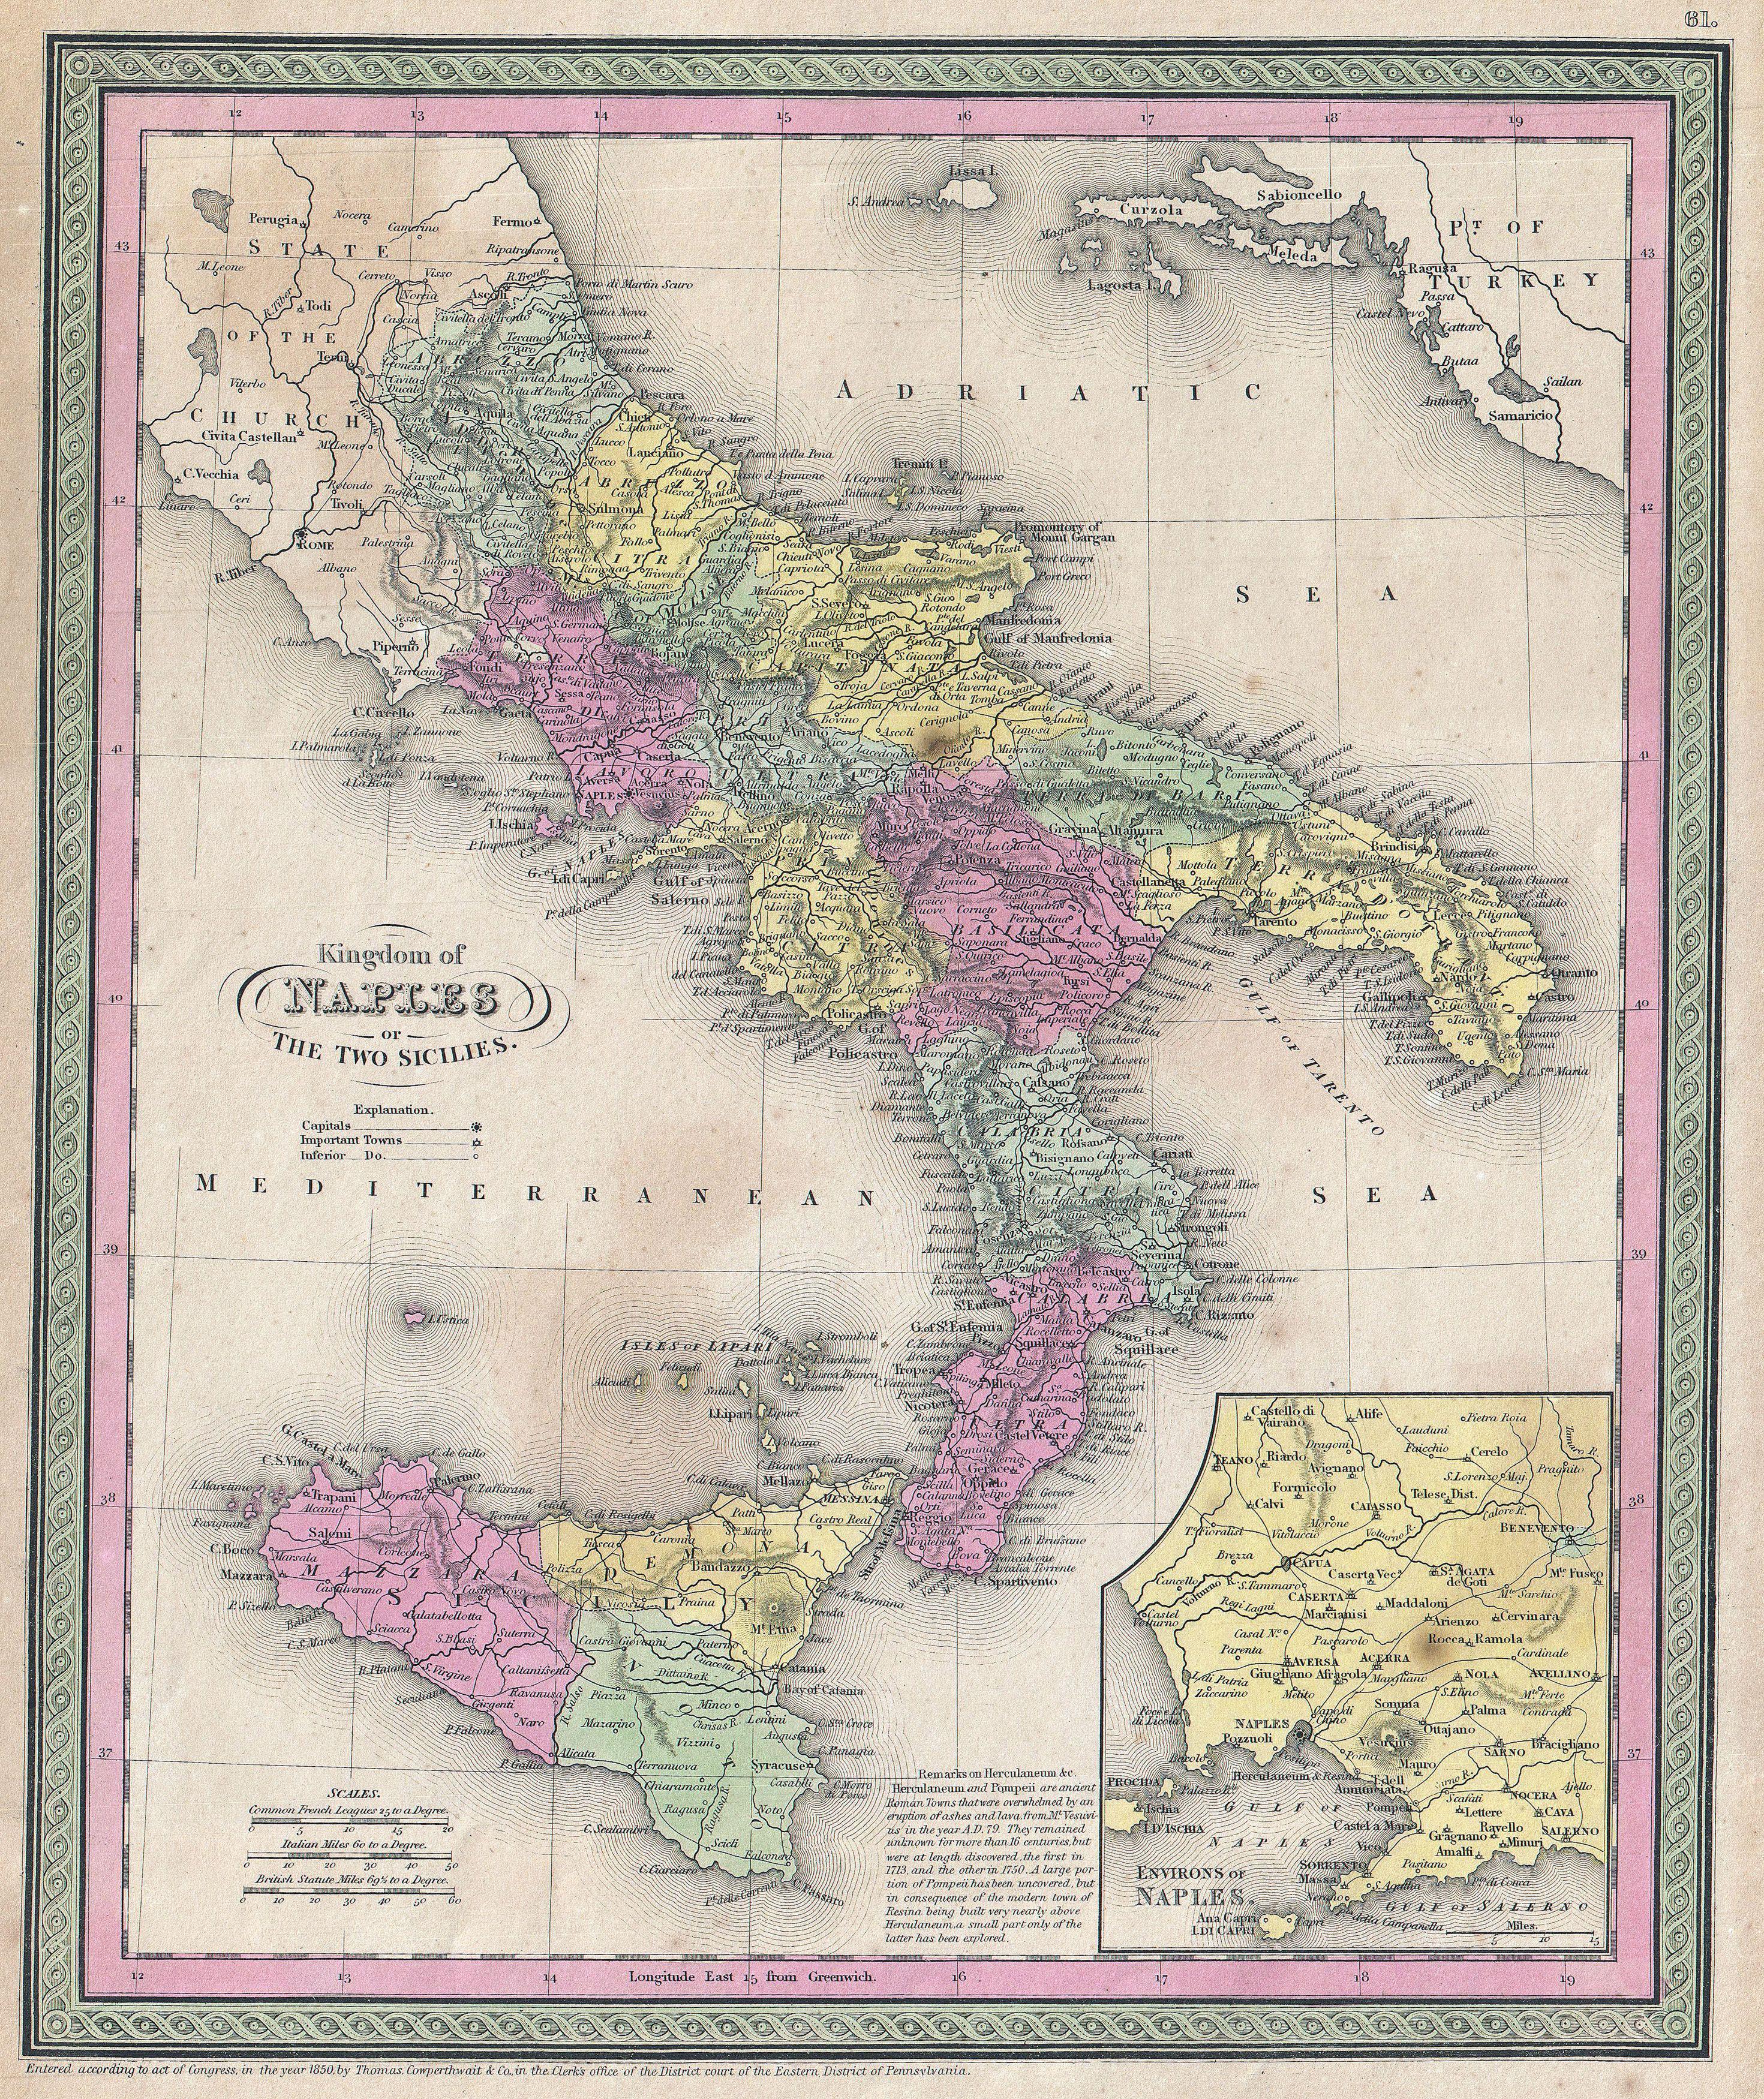 1853 Mitchell Map of Southern Italy ( Naples, Sicily ) - Geographicus - ItalySouth-mitchell-1850